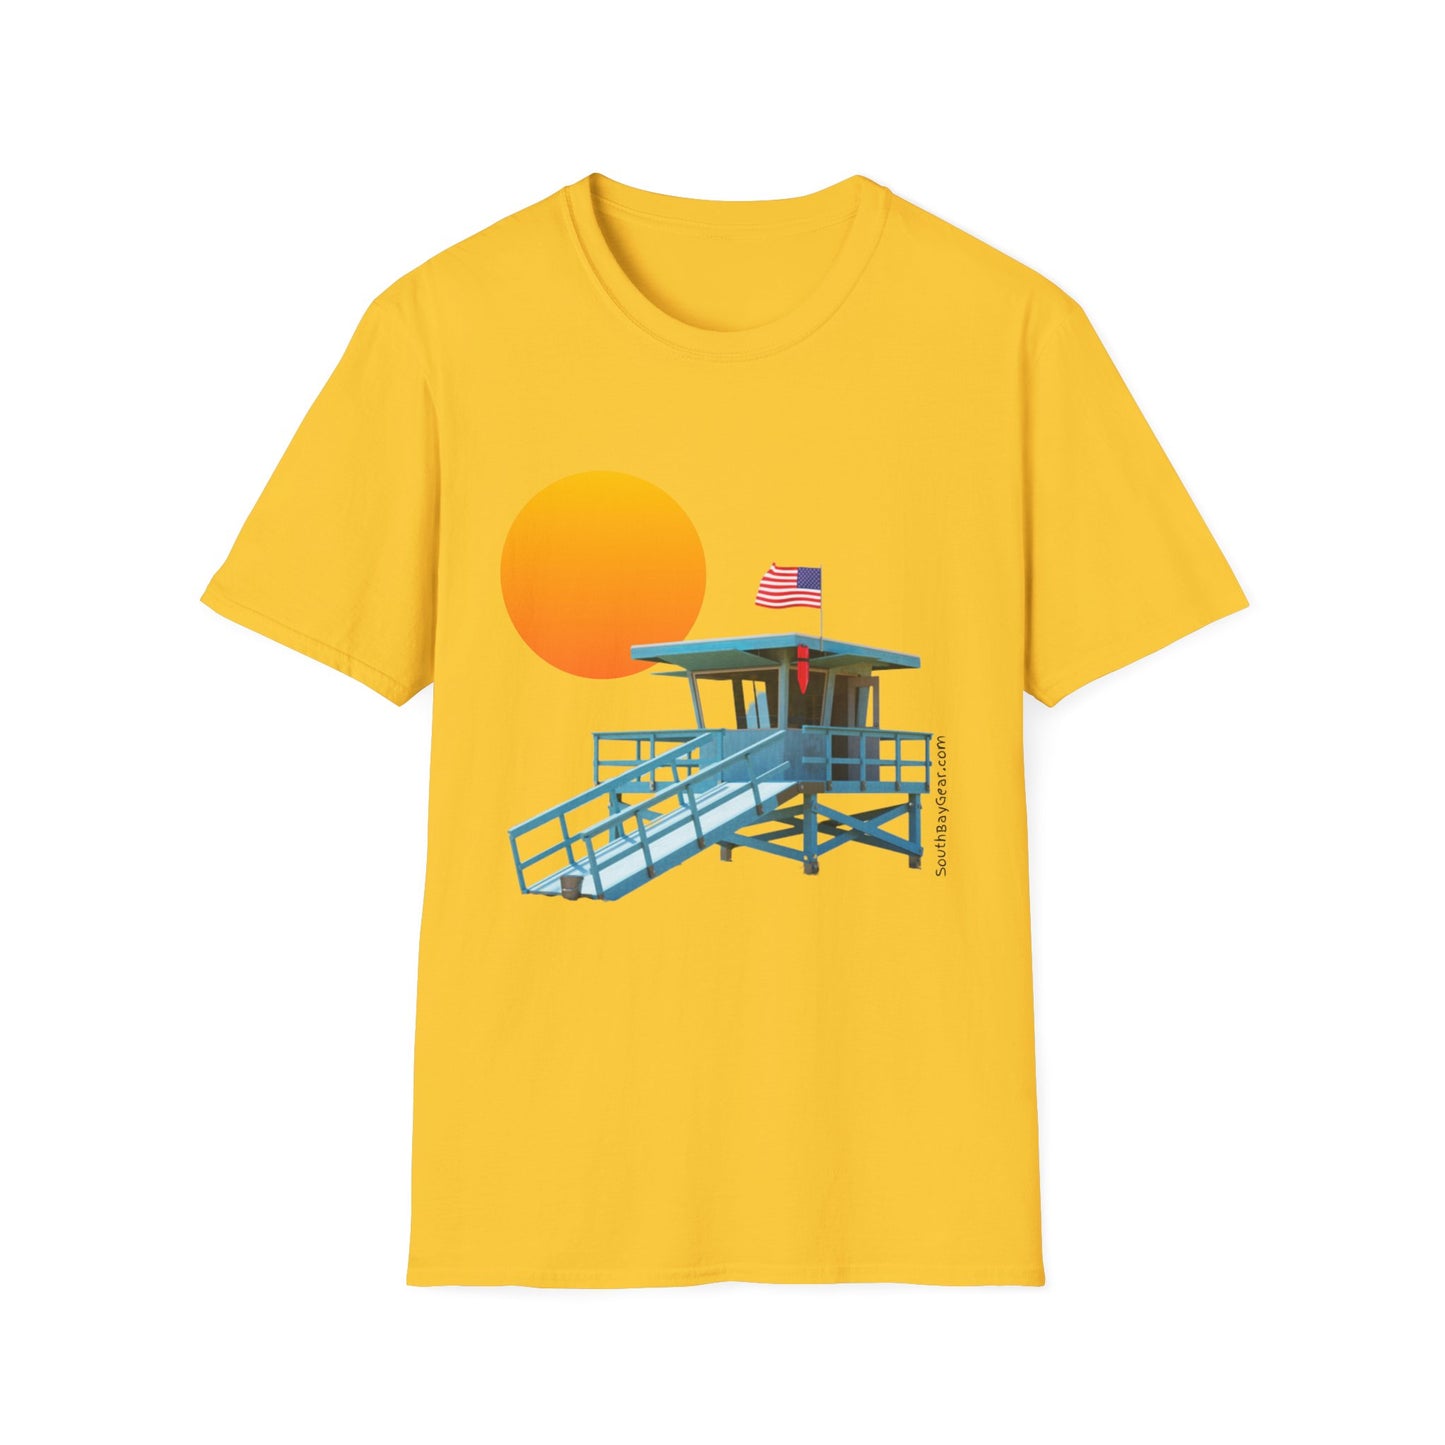 South Bay Lifeguard Stand with American Flag Beach Scene M/W Softstyle T-Shirt